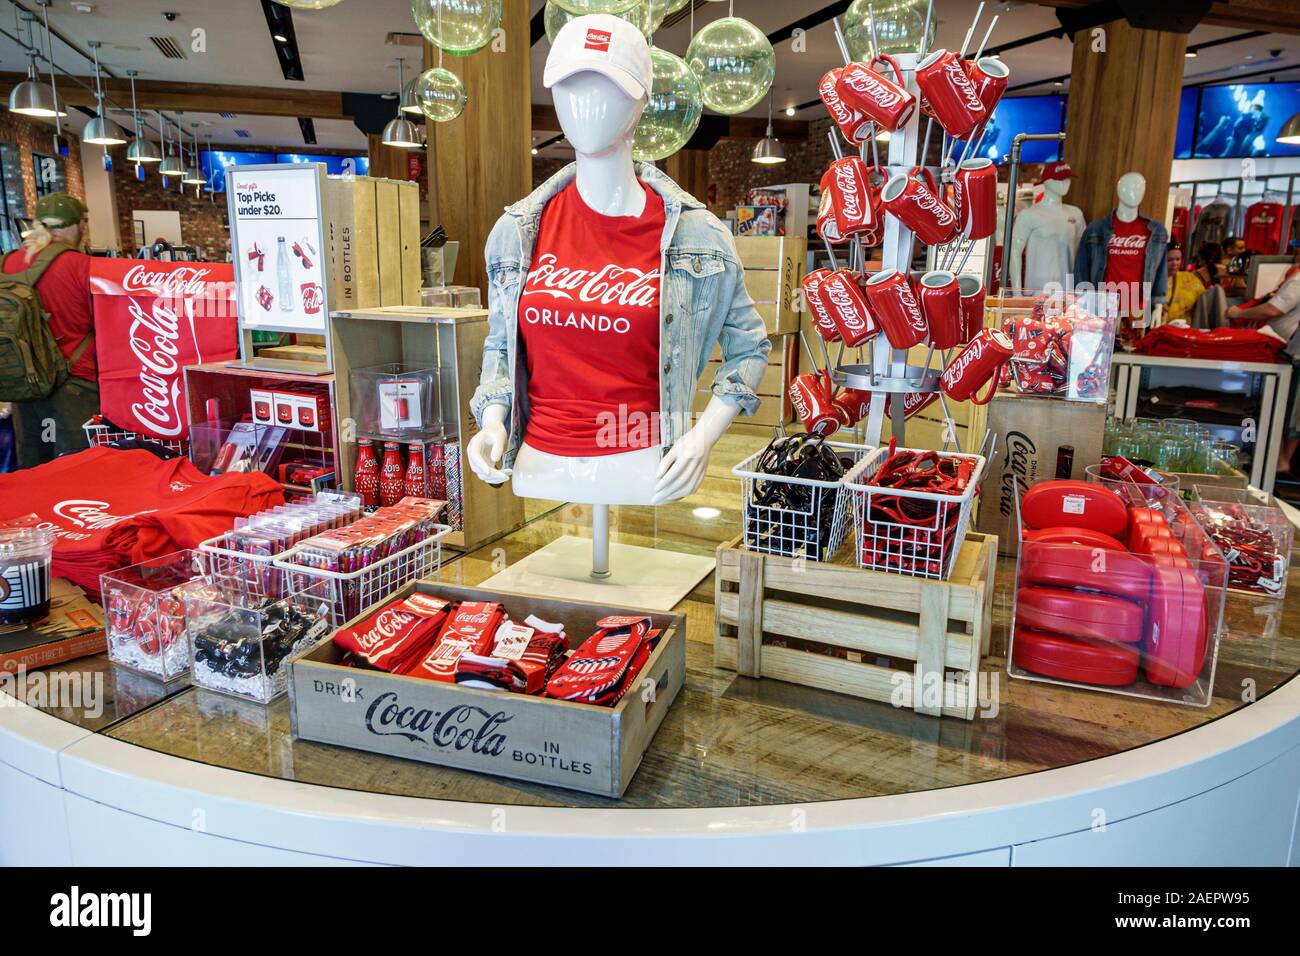 Store Display Coca Cola High Resolution Stock Photography and Images - Alamy